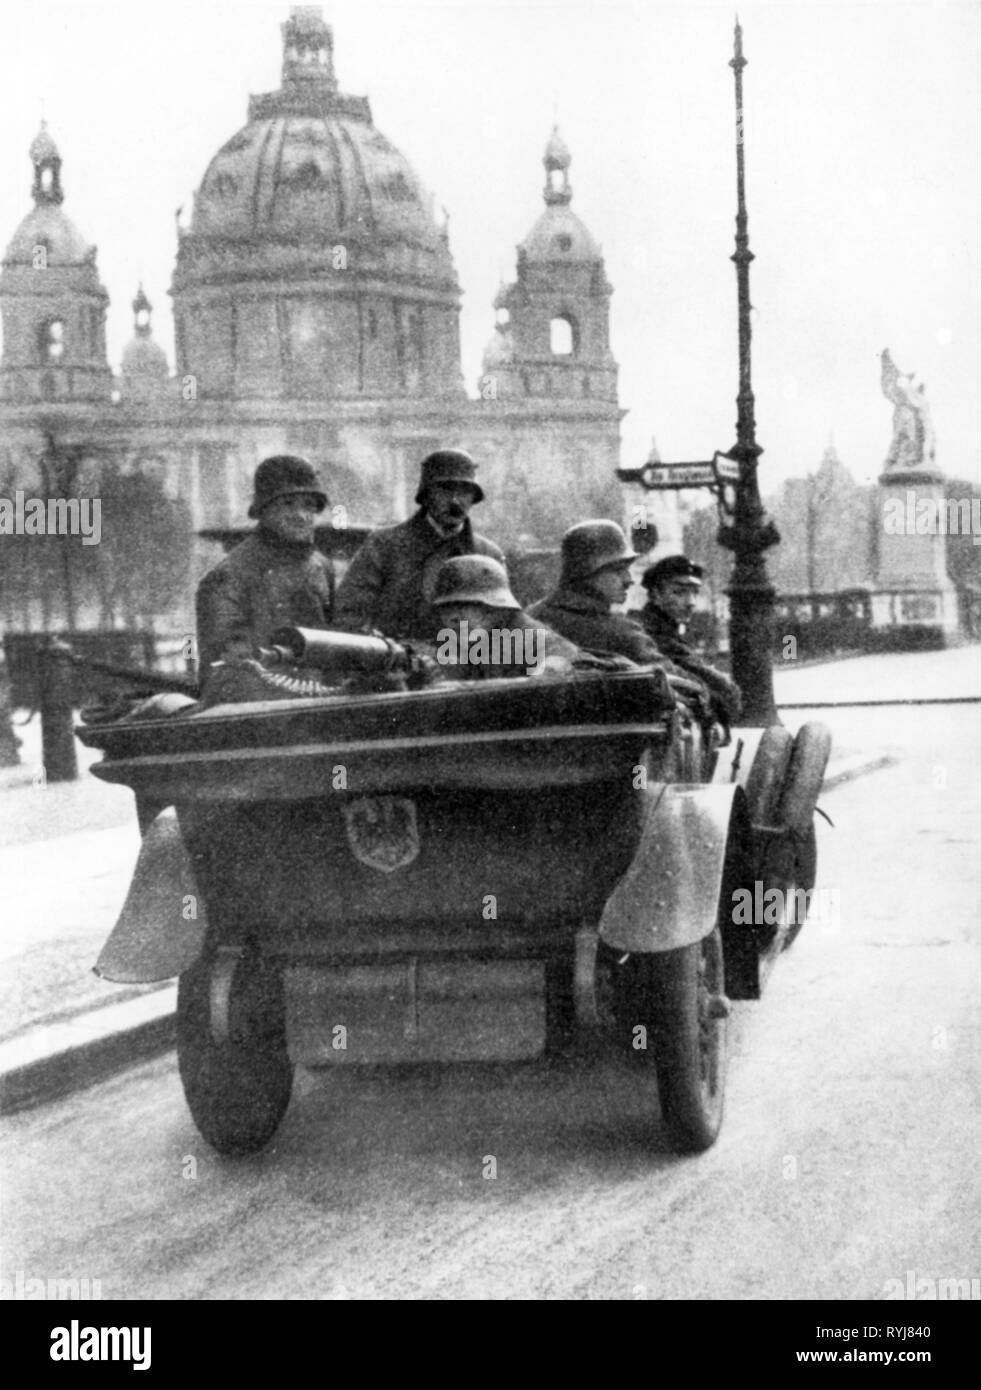 Revolution, 1918 - 1919, Germany, Berlin, government forces with car, Unter den Linden in front of the Schlossbruecke, machine gun, machine guns, machine-gun, military, soldiers, soldier, armed forces, Berlin cathedral, church, churches, German Revolution of 1918-1919, bridge, bridges, street, streets, German Reich, republic, republics, Free State of Prussia, 1910s, 10s, 20th century, people, men, man, male, group, groups, revolution, revolutions, government forces, government troops, car, cars, historic, historical, Additional-Rights-Clearance-Info-Not-Available Stock Photo